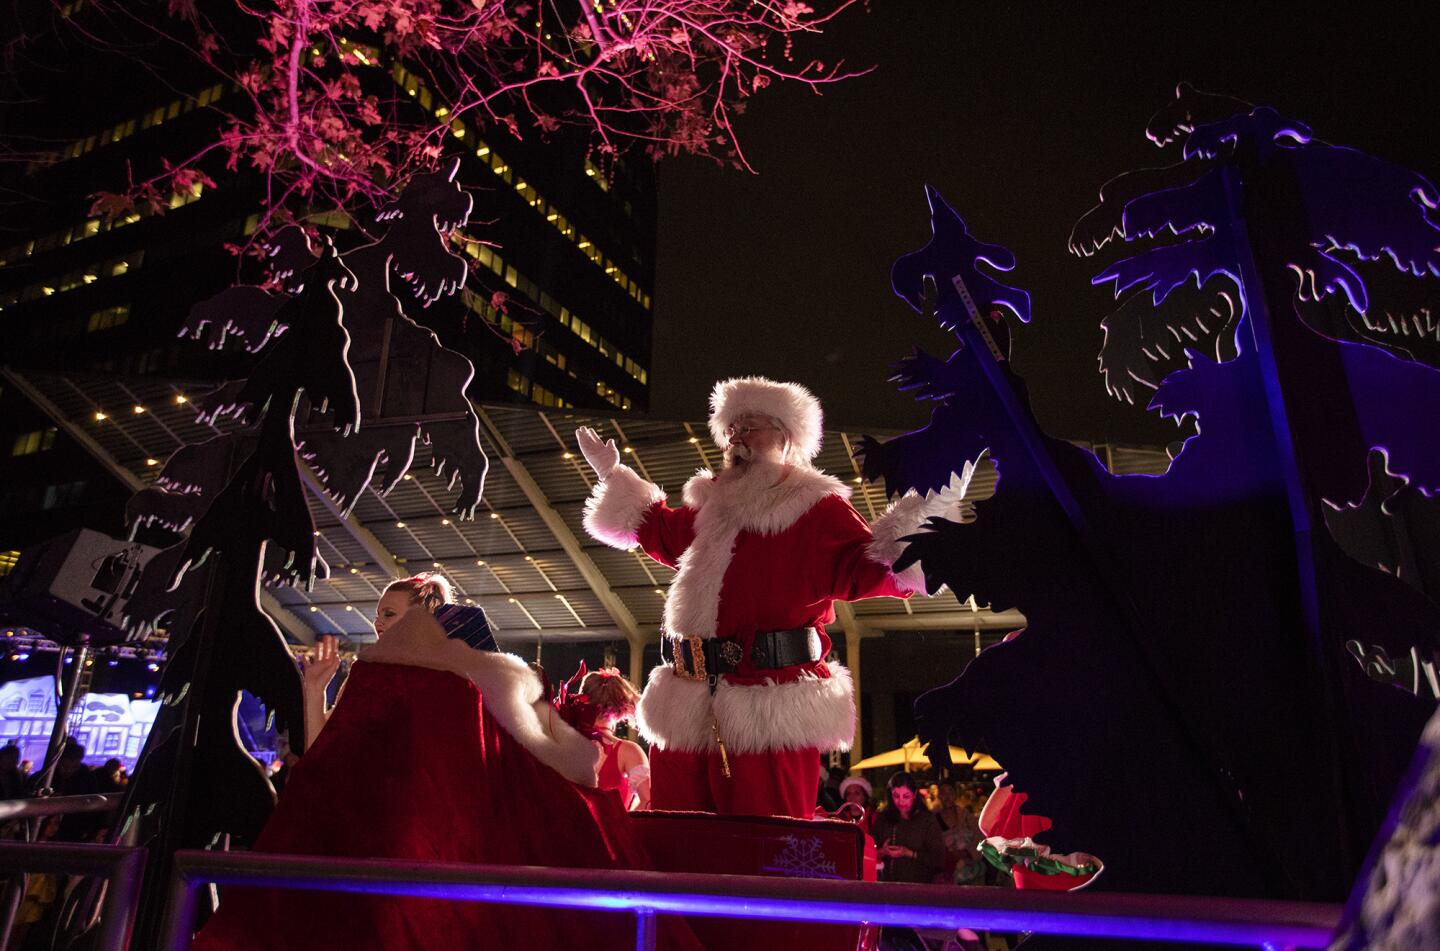 Santa Claus waves to the crowd during the annual South Coast Plaza tree lighting ceremony on Thursday, November 15.